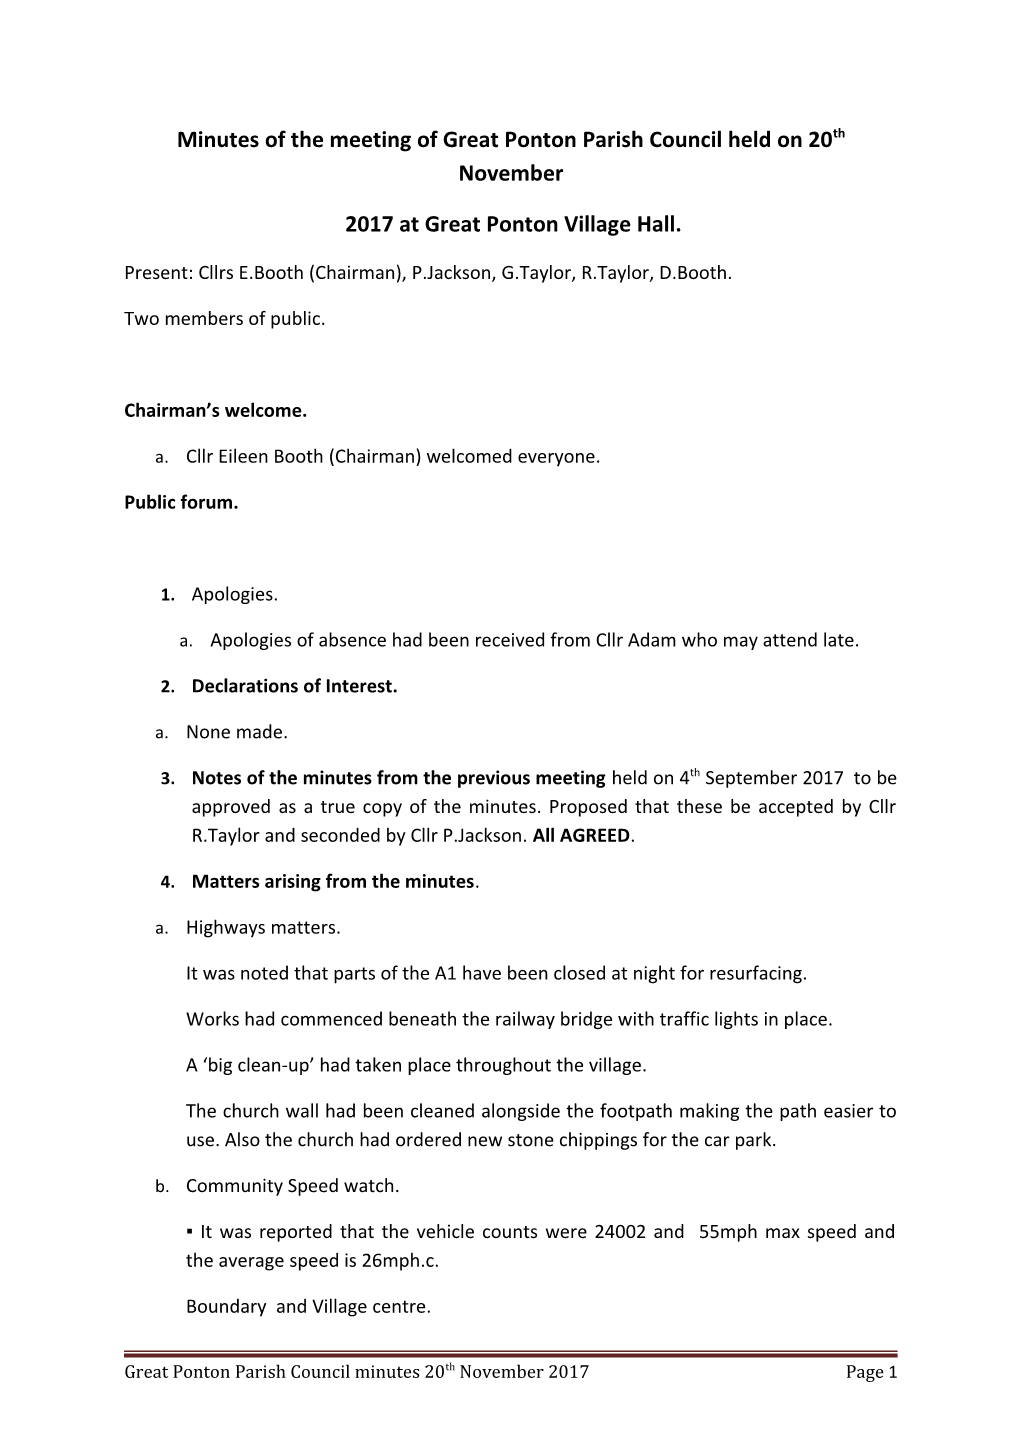 Minutes of the Meeting of Great Ponton Parish Council Held on 20Th November